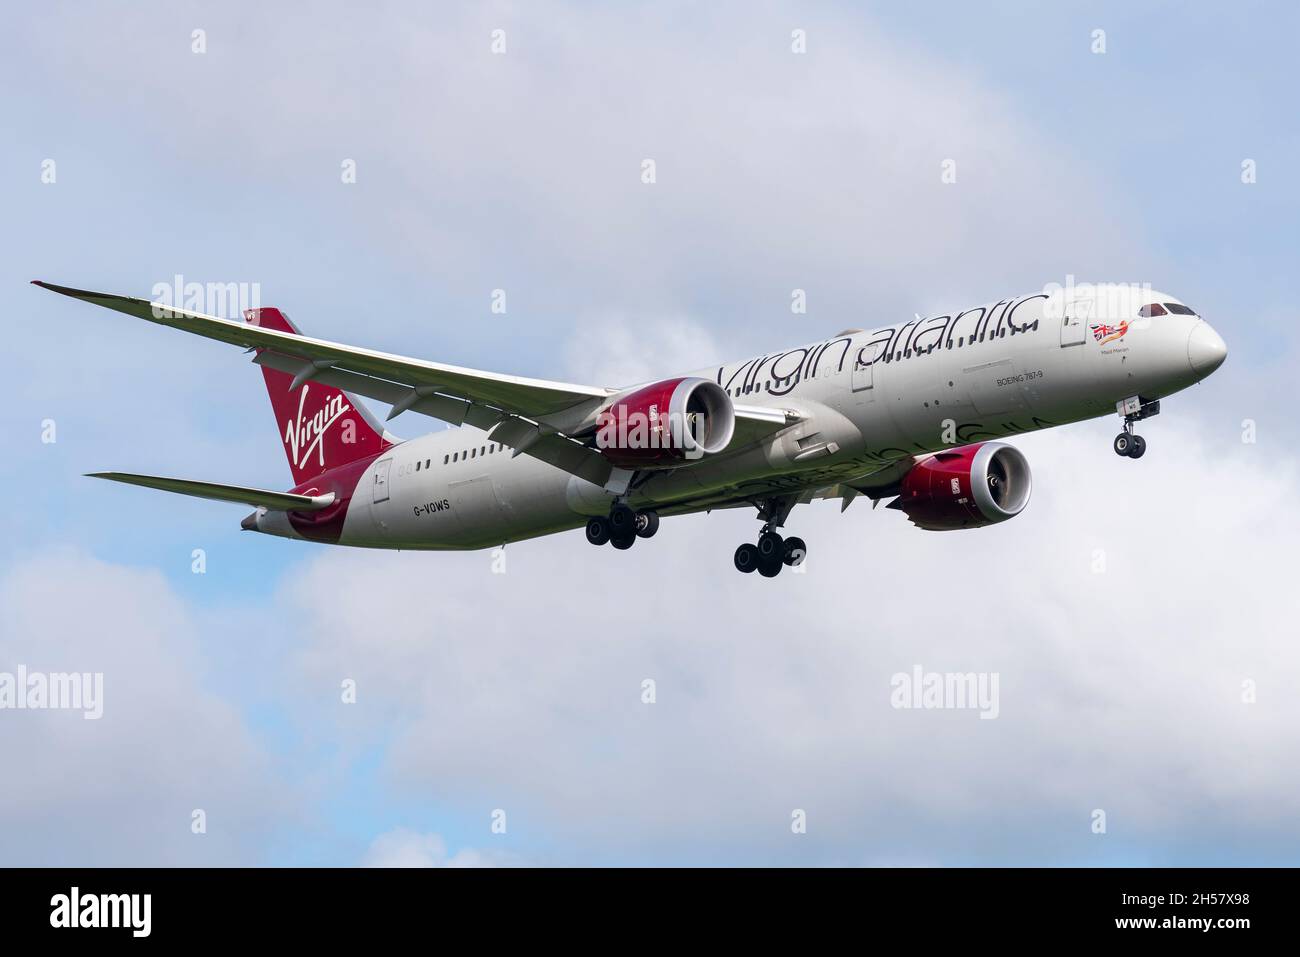 Virgin Atlantic Boeing 787 Dreamliner airliner jet plane G-VOWS on approach to land at London Heathrow Airport, UK. Named Maid Marian Stock Photo